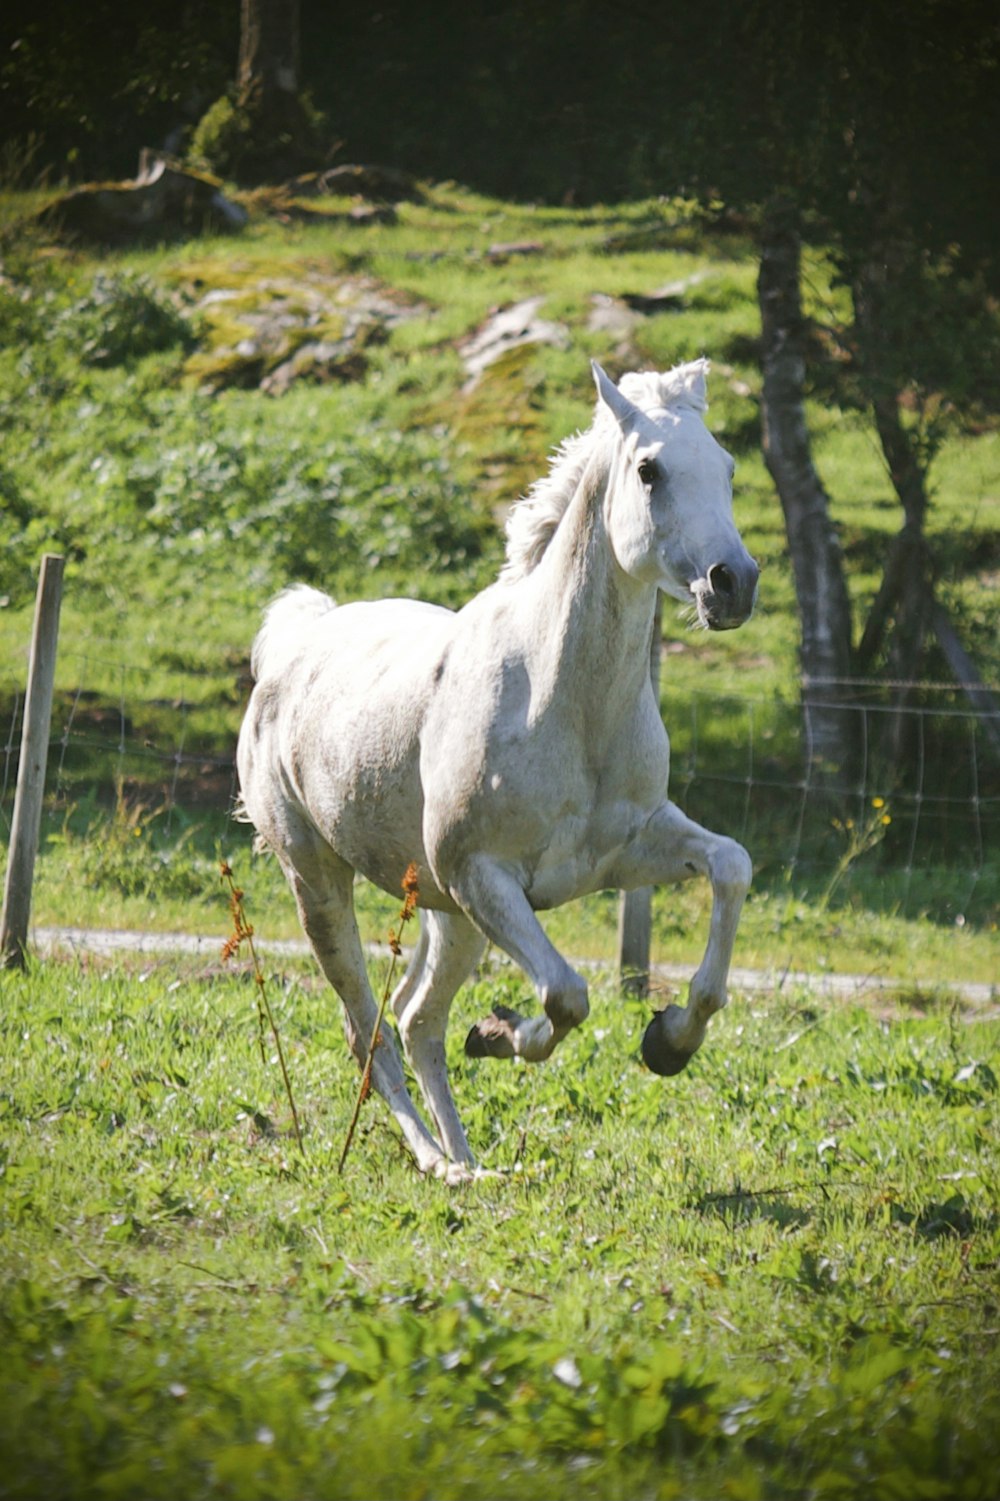 a white horse running in a grassy field